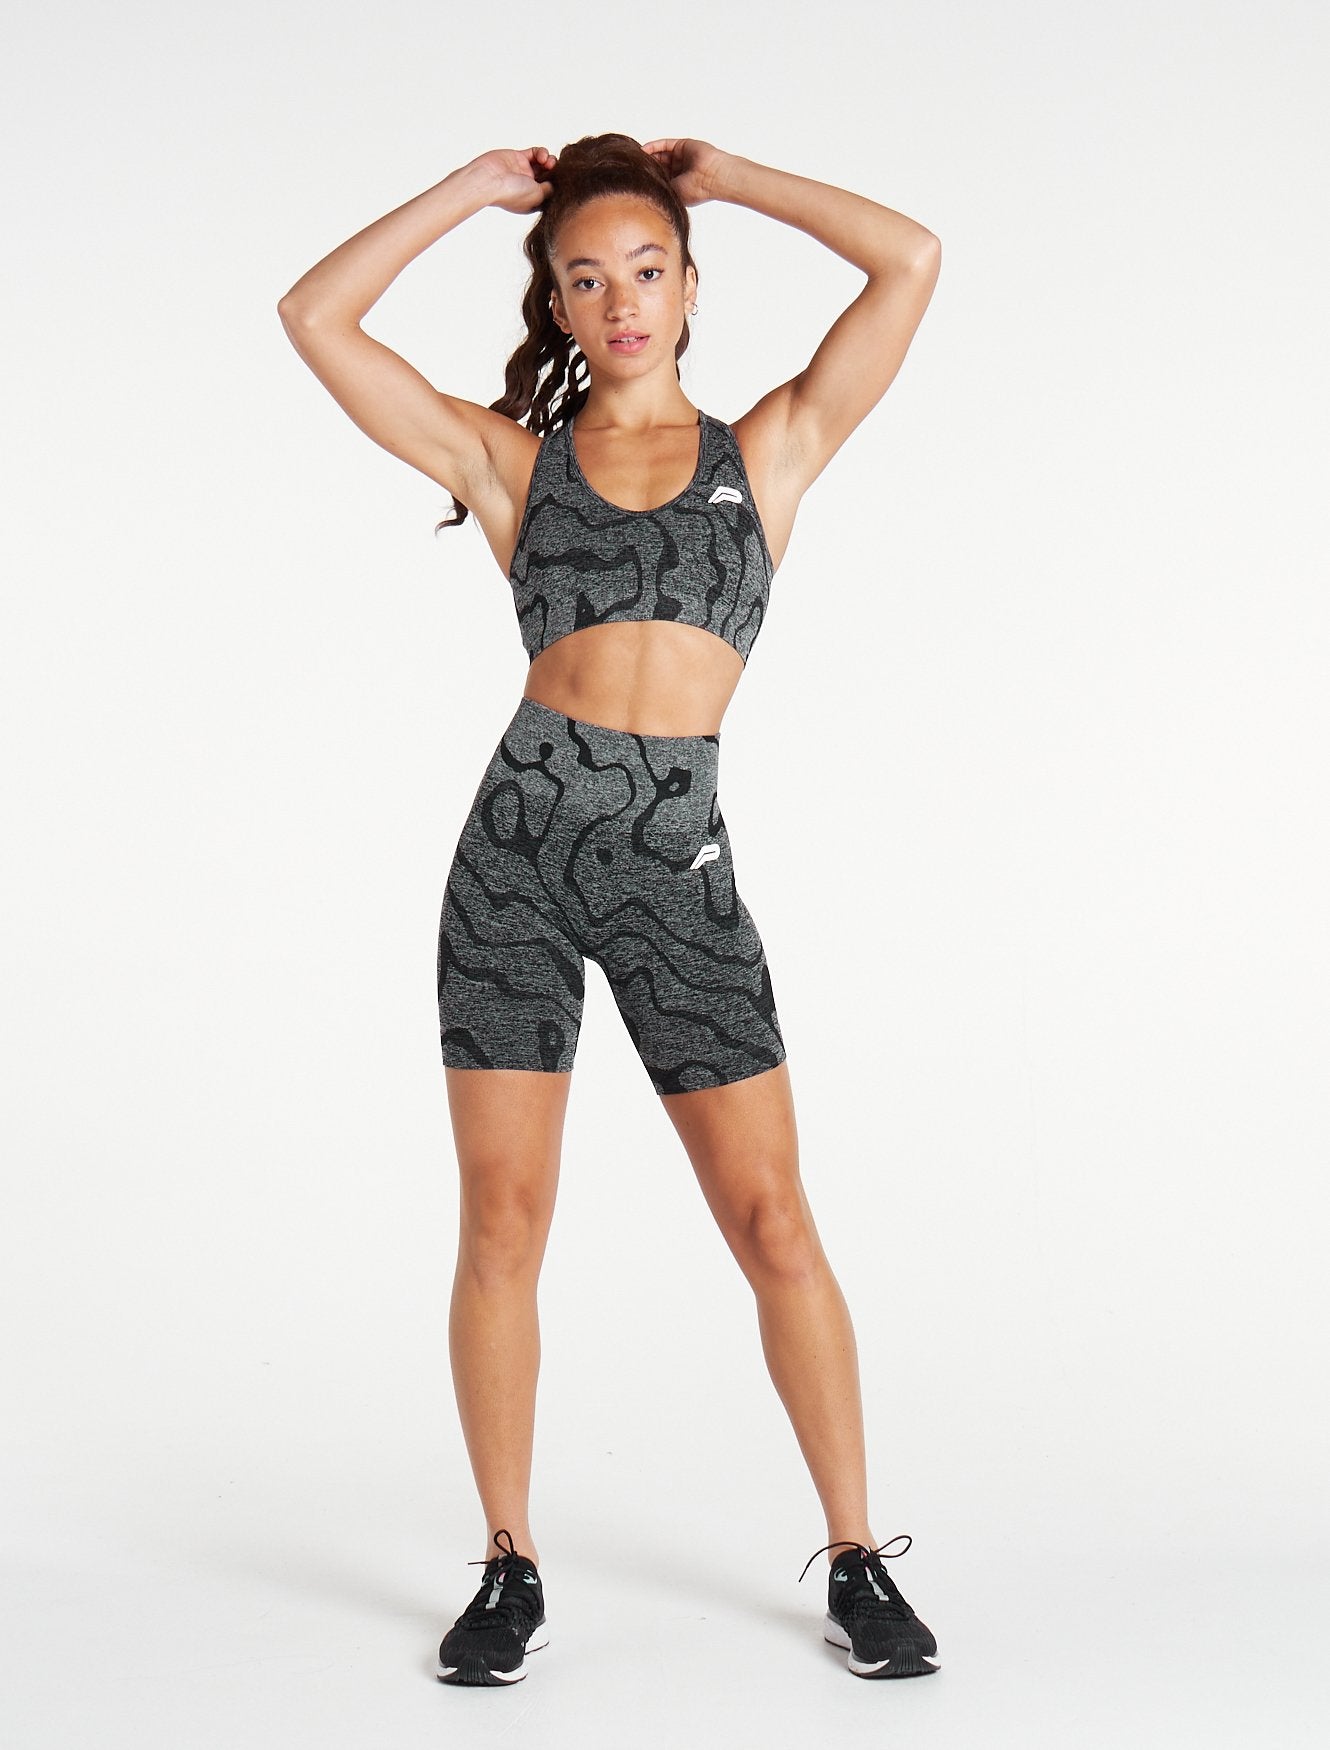 Women's Gym Clothing, Essential Collection